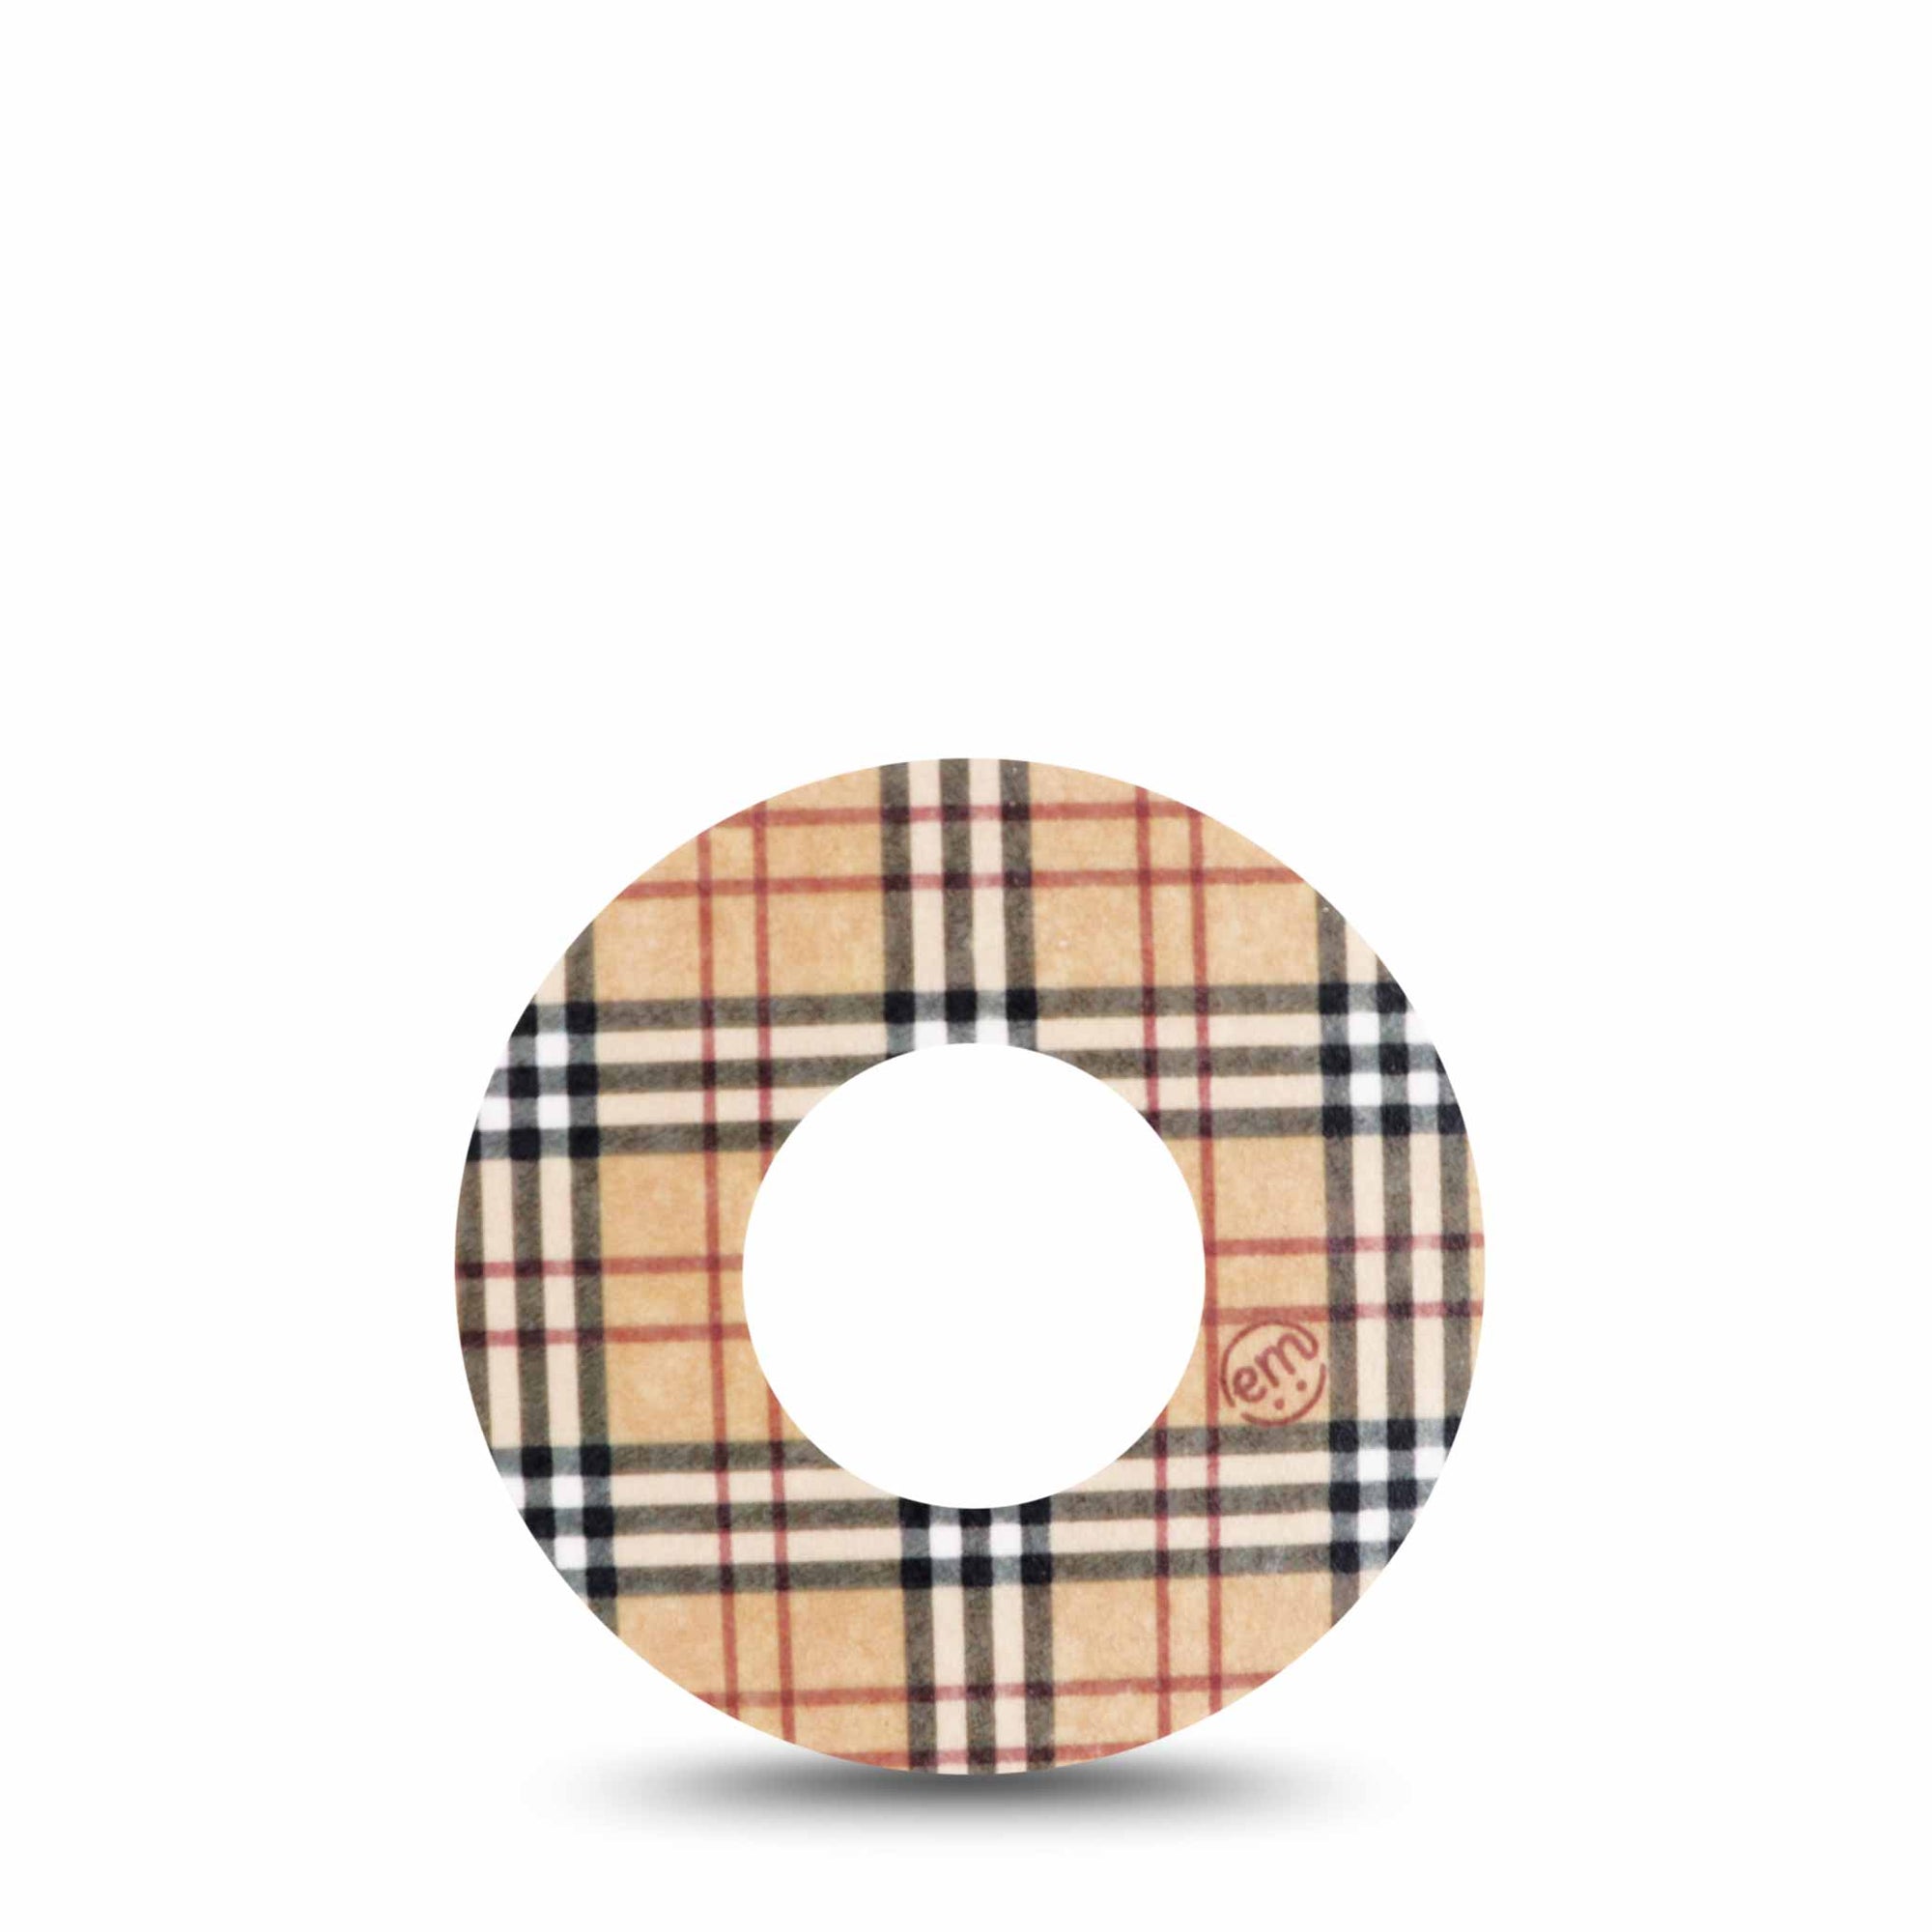 ExpressionMed Plaid and Bougie Libre CGM Patch